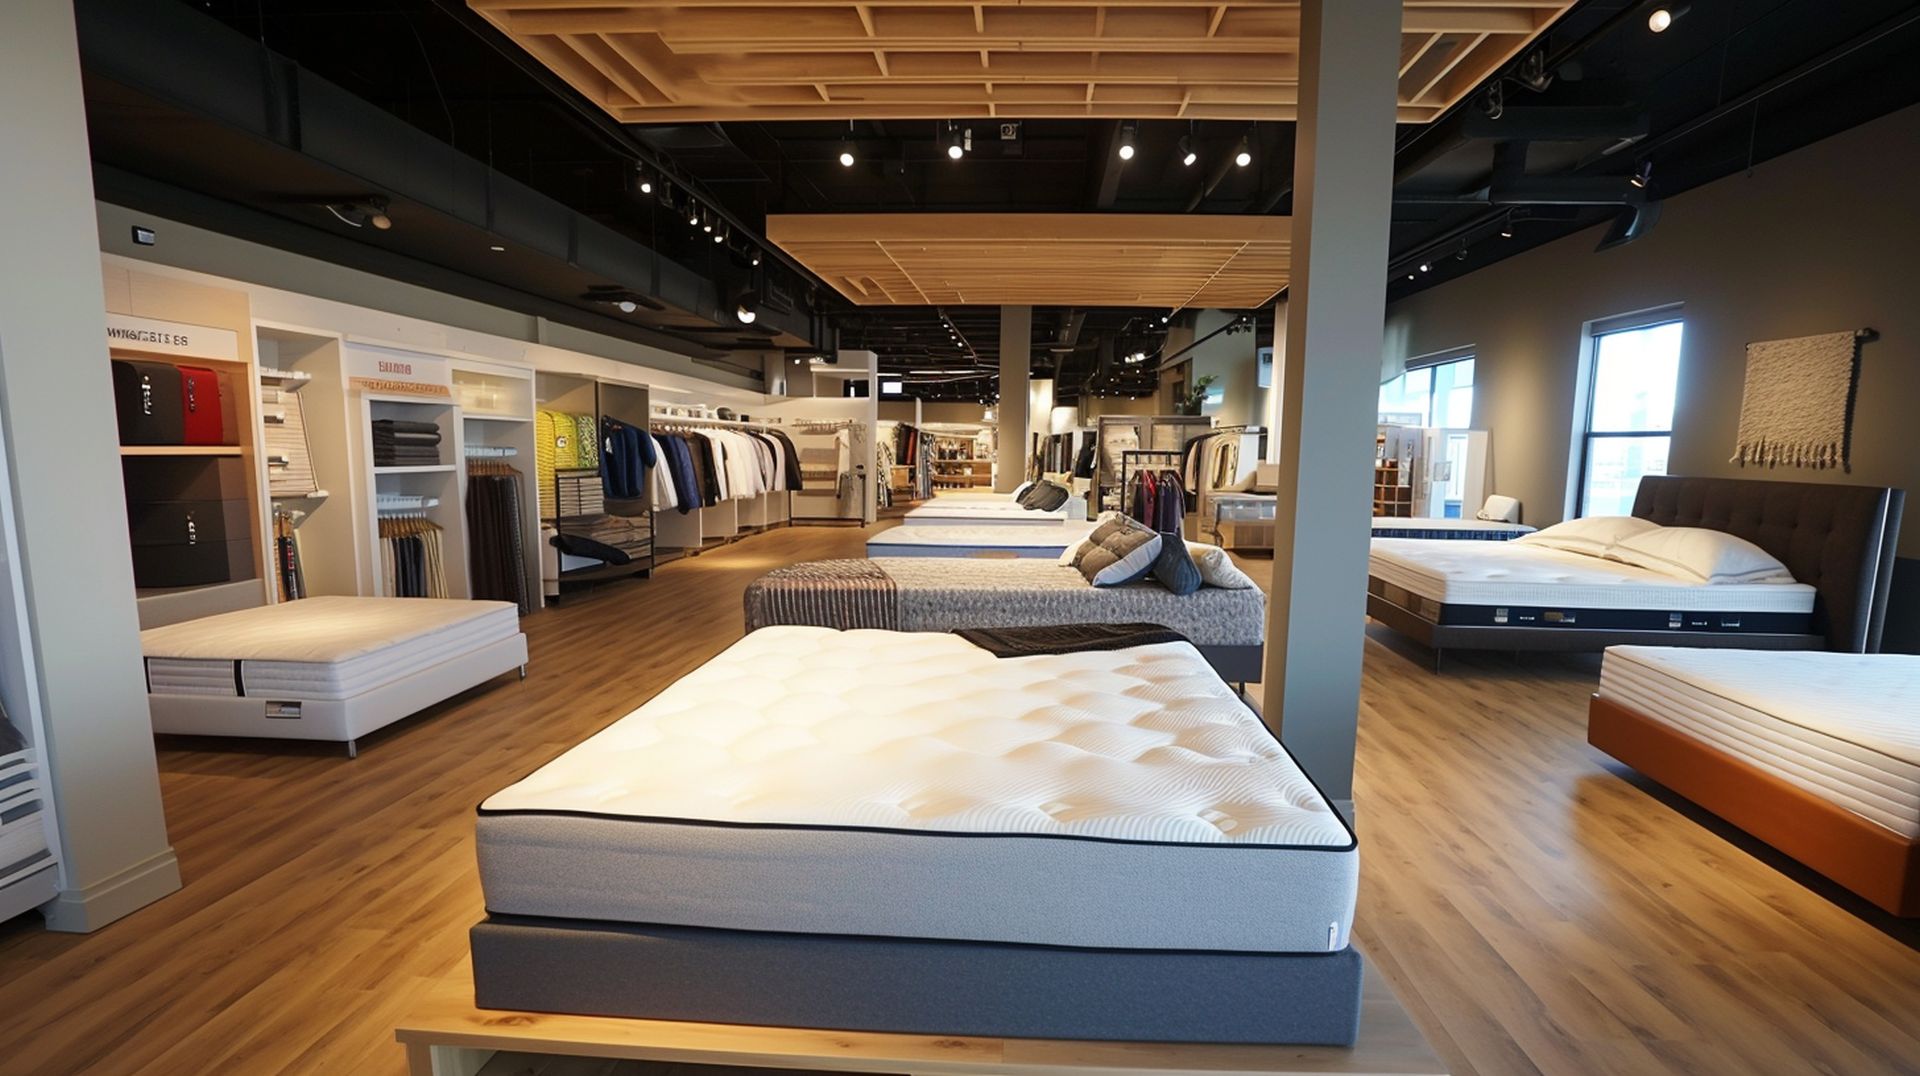 If you're looking for a new bed, mattress stores in Modesto offer the best customer and delivery service, financing, and warranties in California